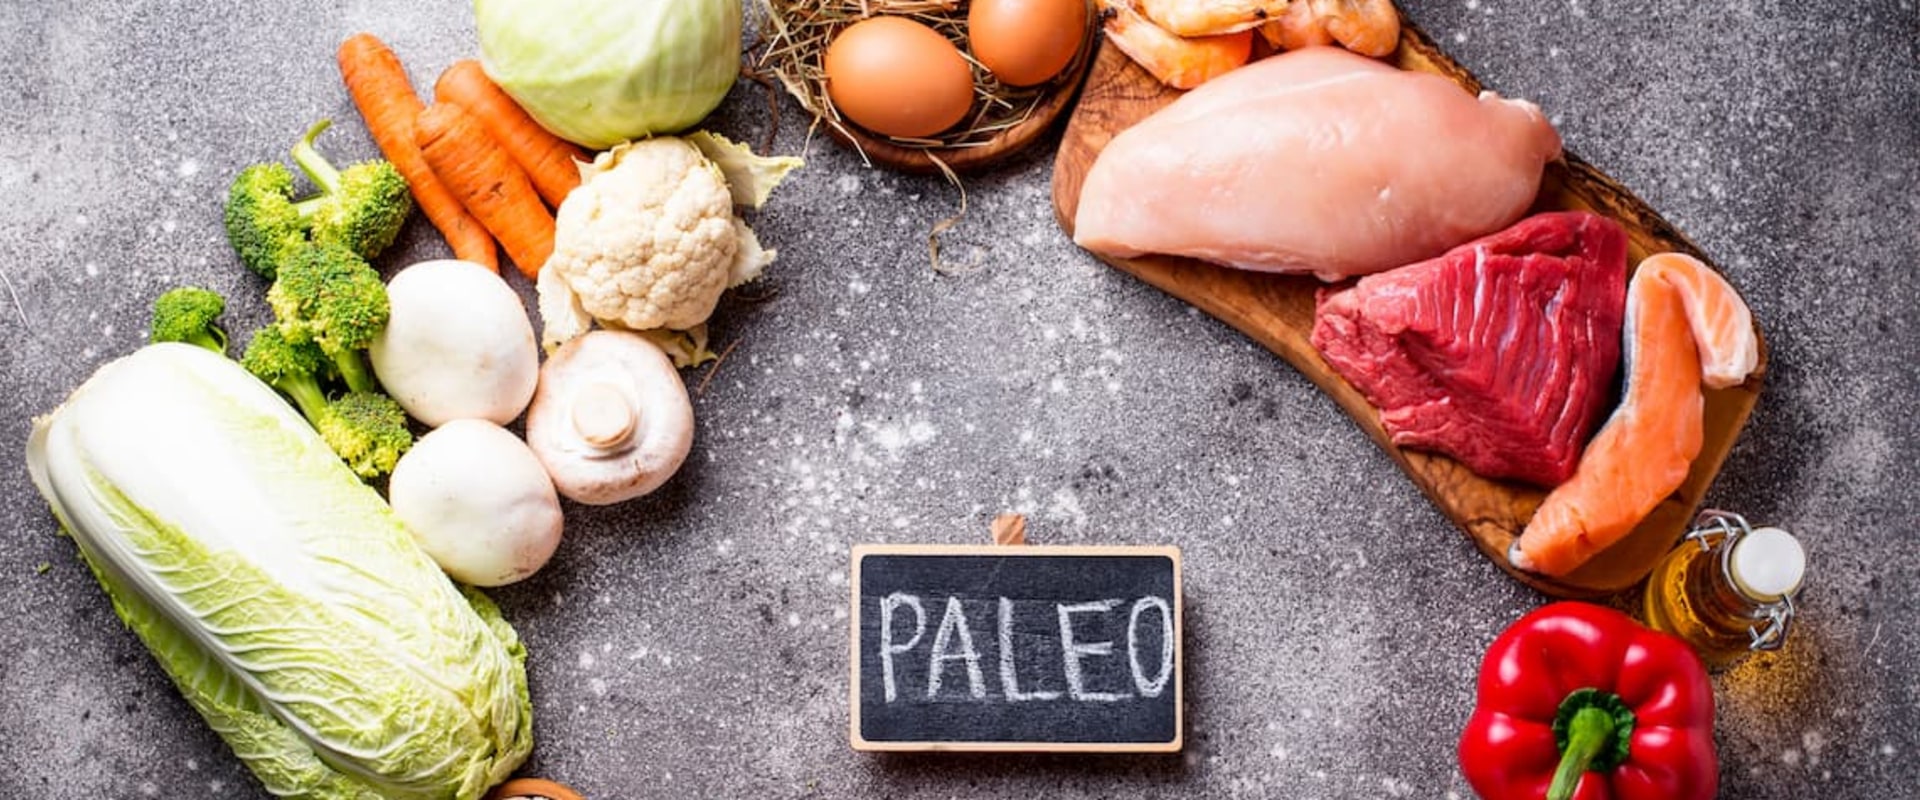 Can i eat grains on a paleo diet?